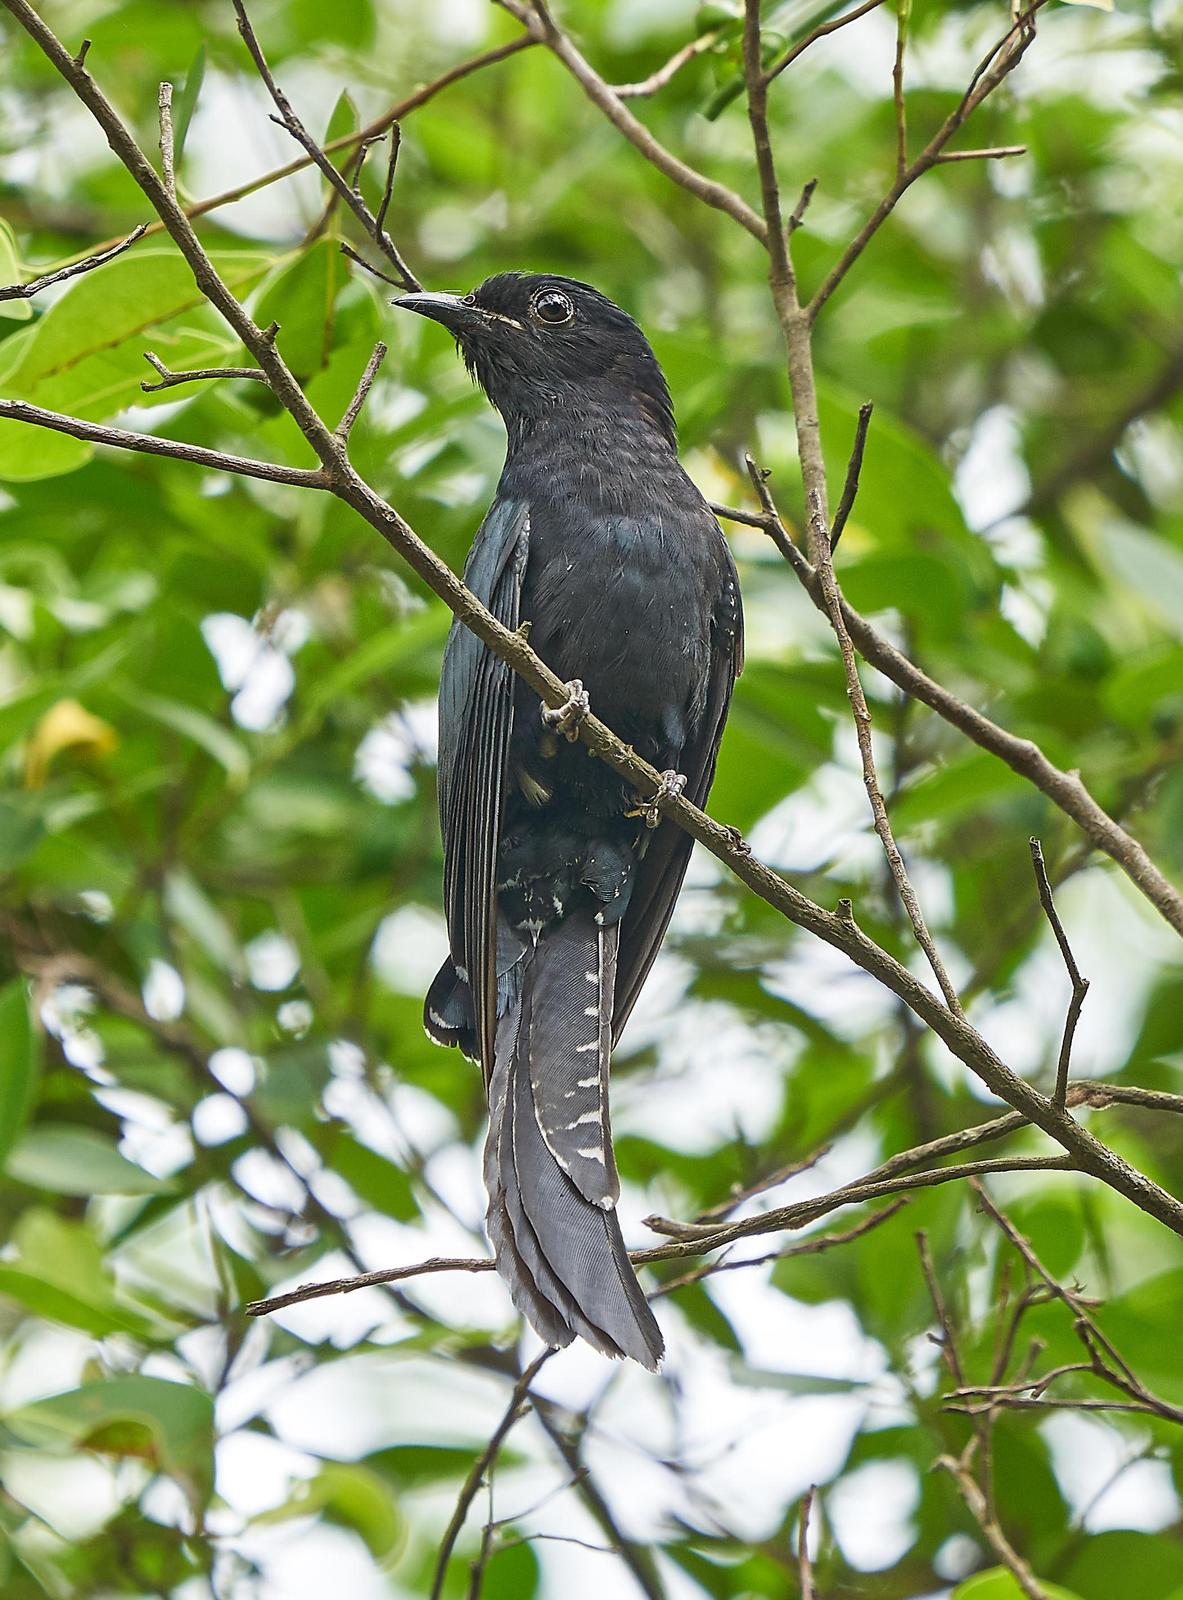 Square-tailed Drongo-Cuckoo Photo by Steven Cheong